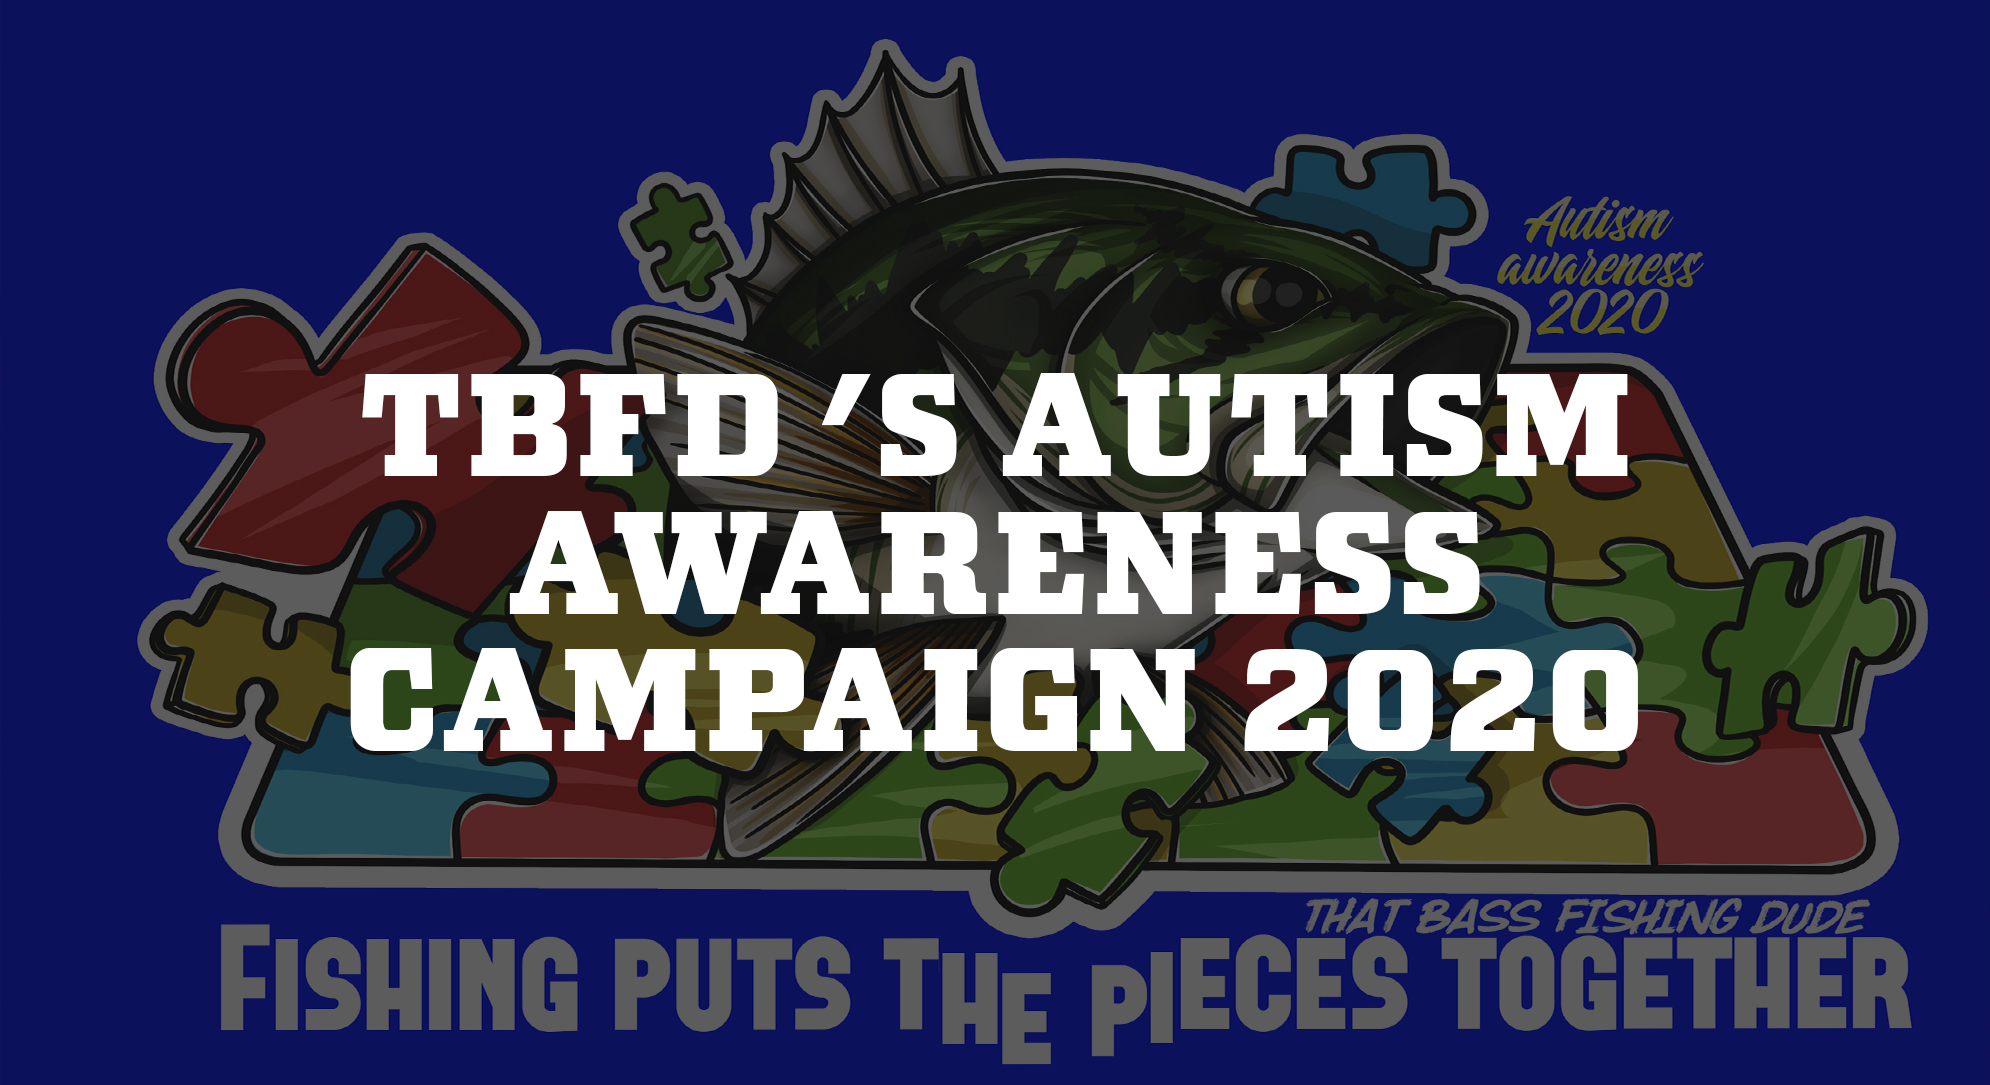 BFD ‘s Autism Awareness Campaign 2020